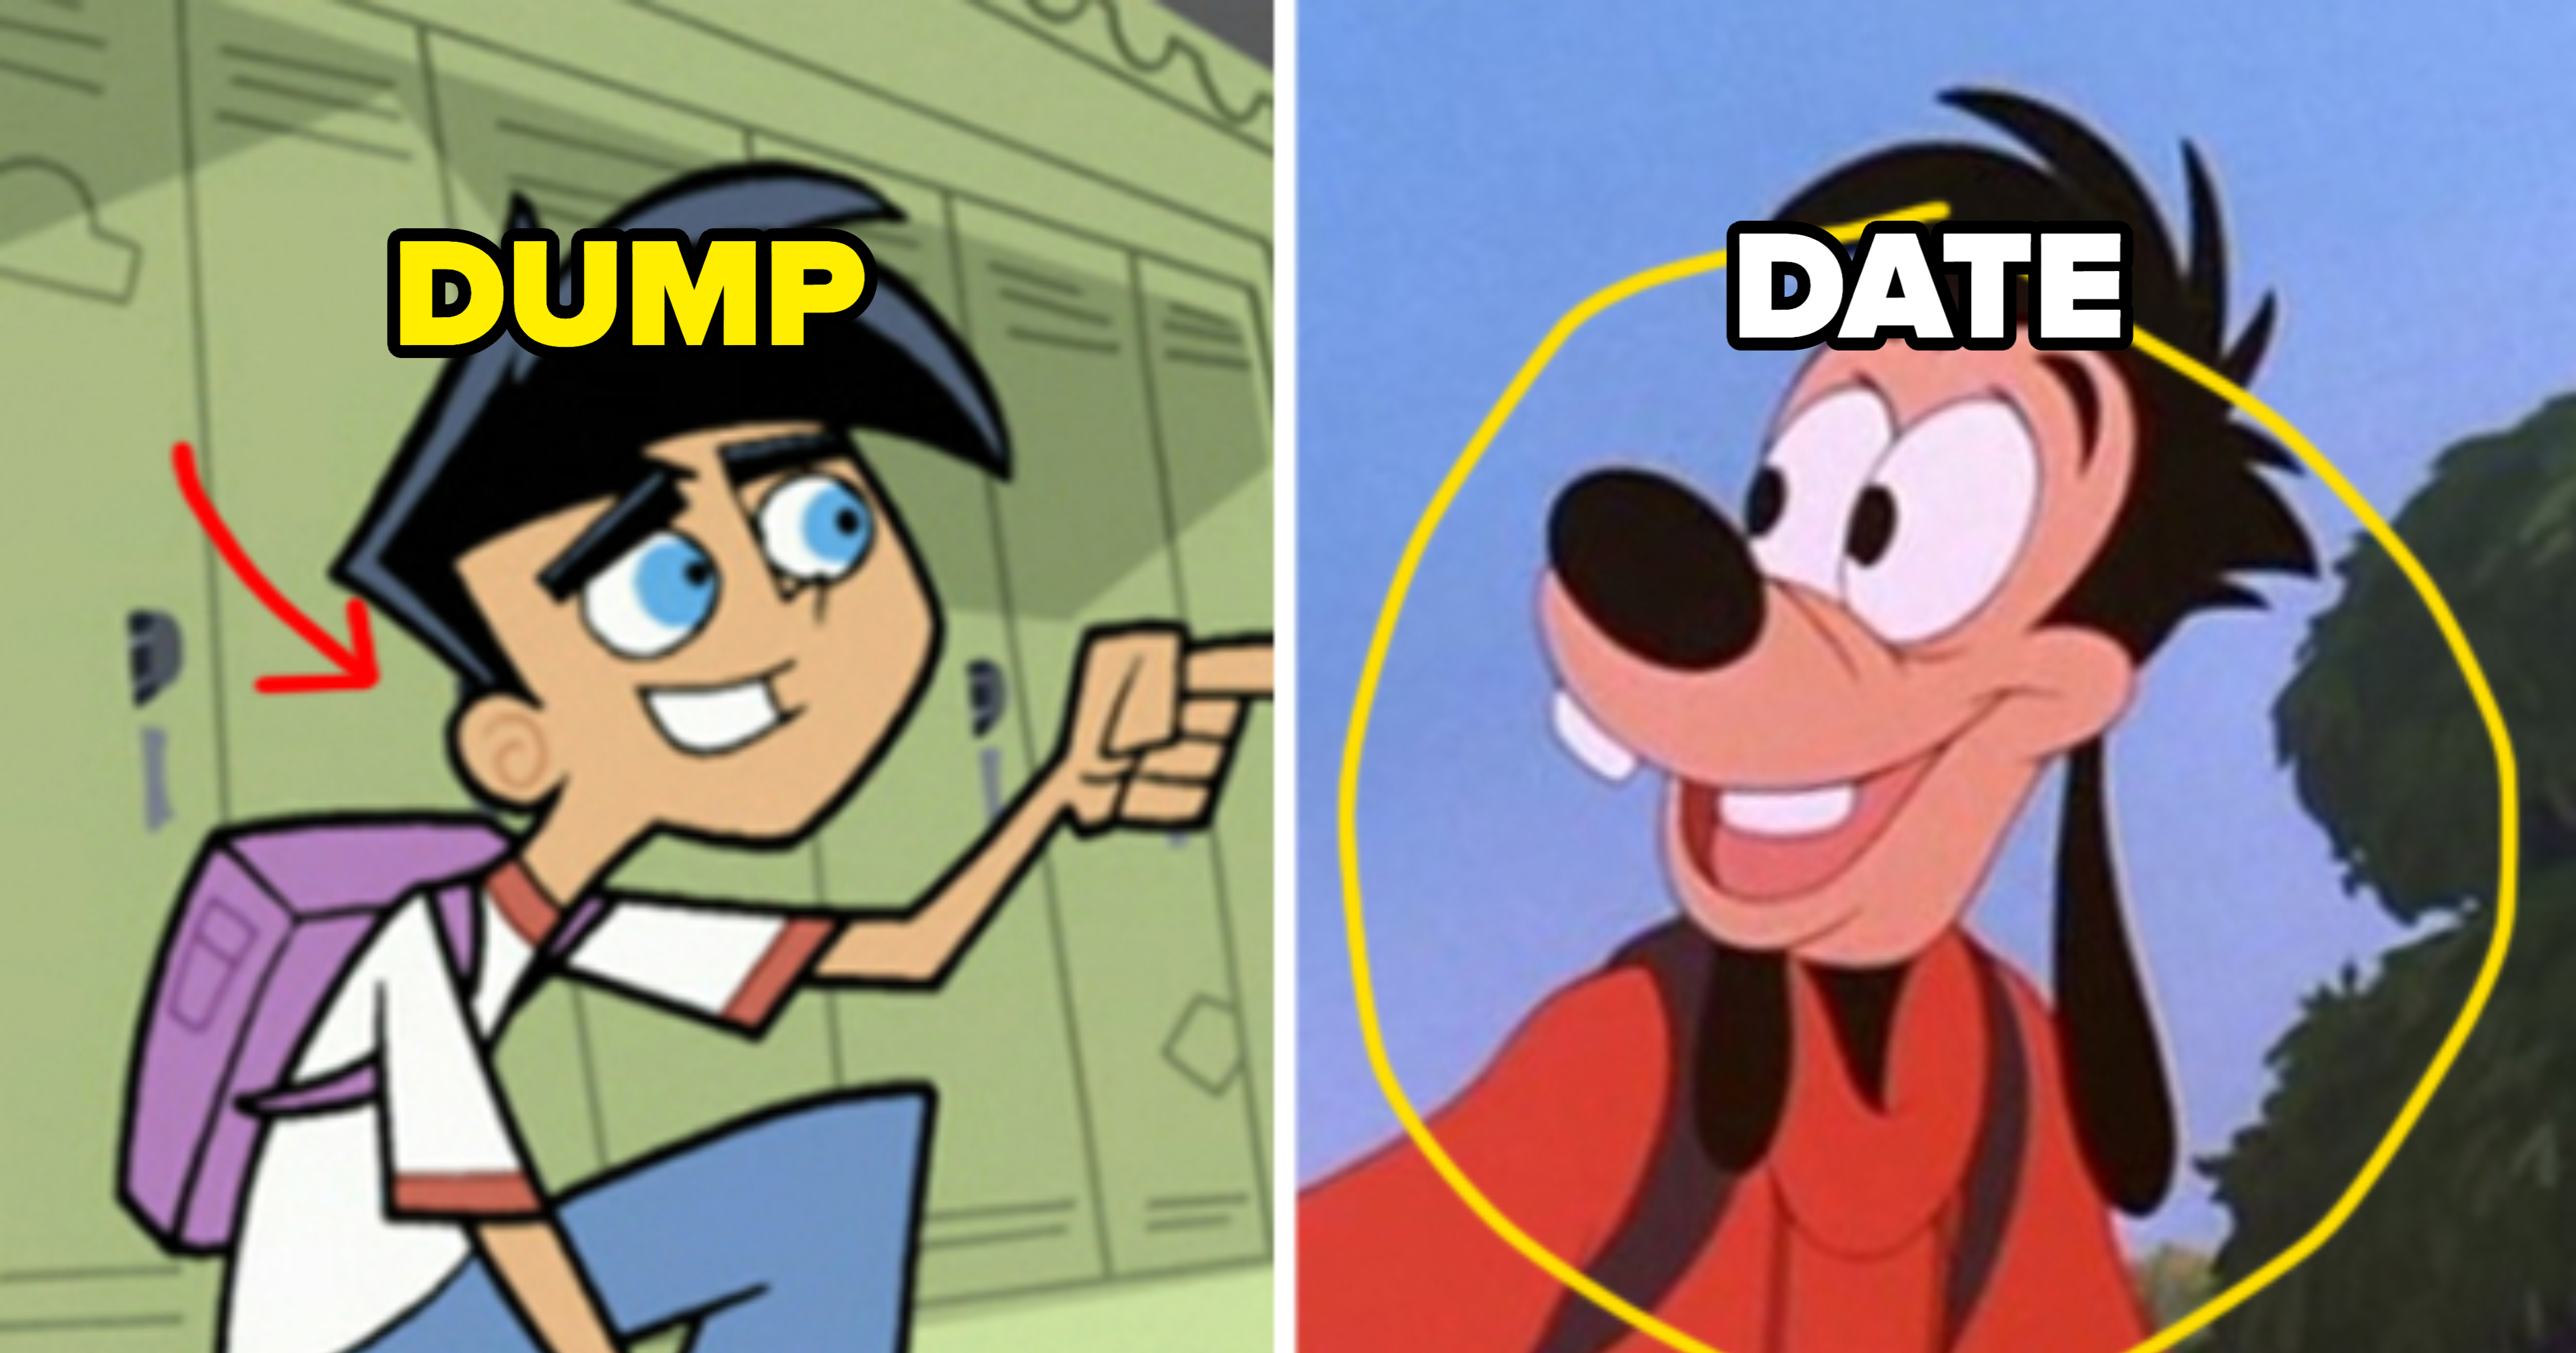 Rate These Cartoon Characters To Discover Your Type